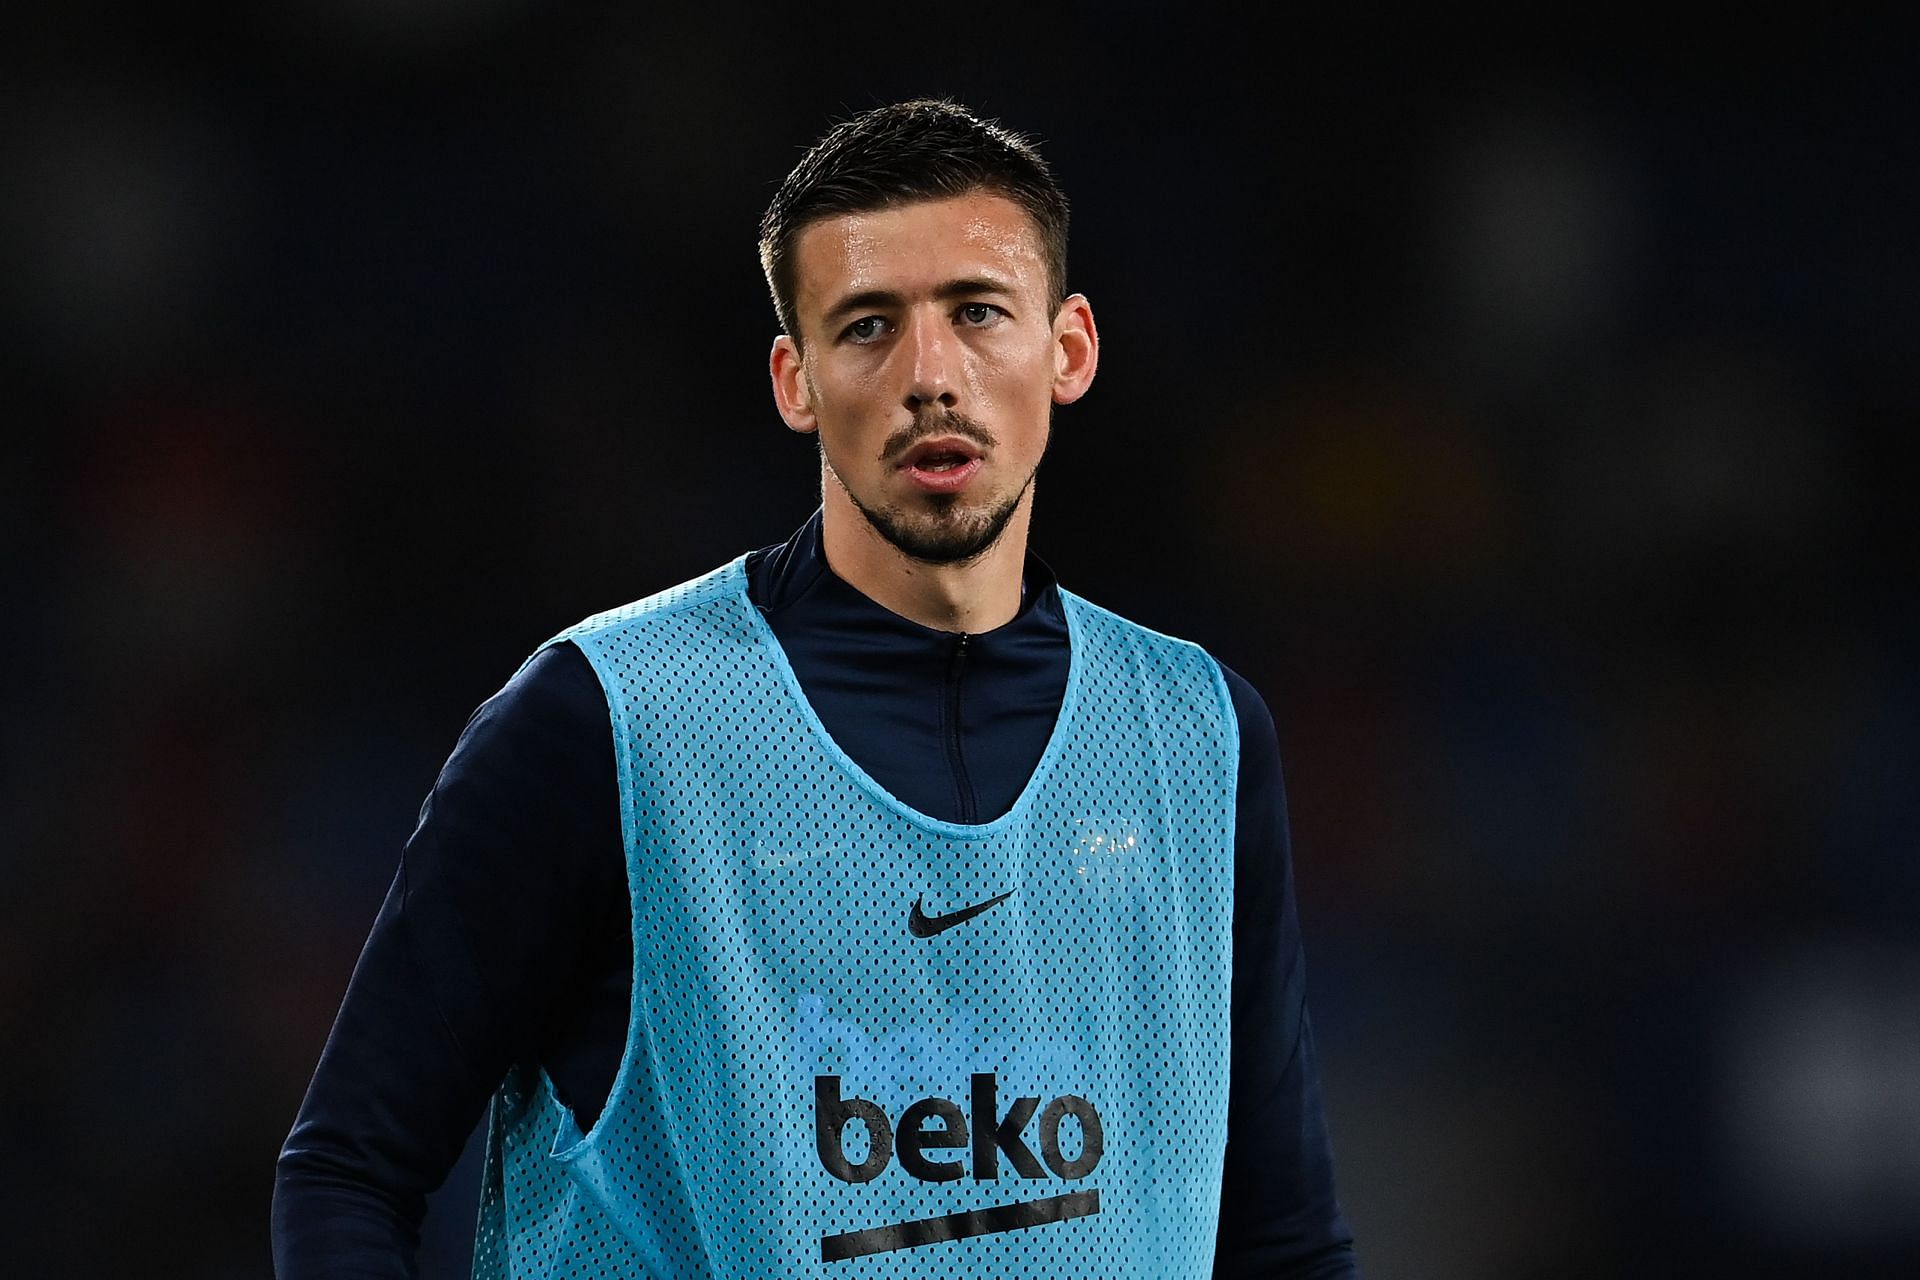 Lenglet is set to leave the club this summer